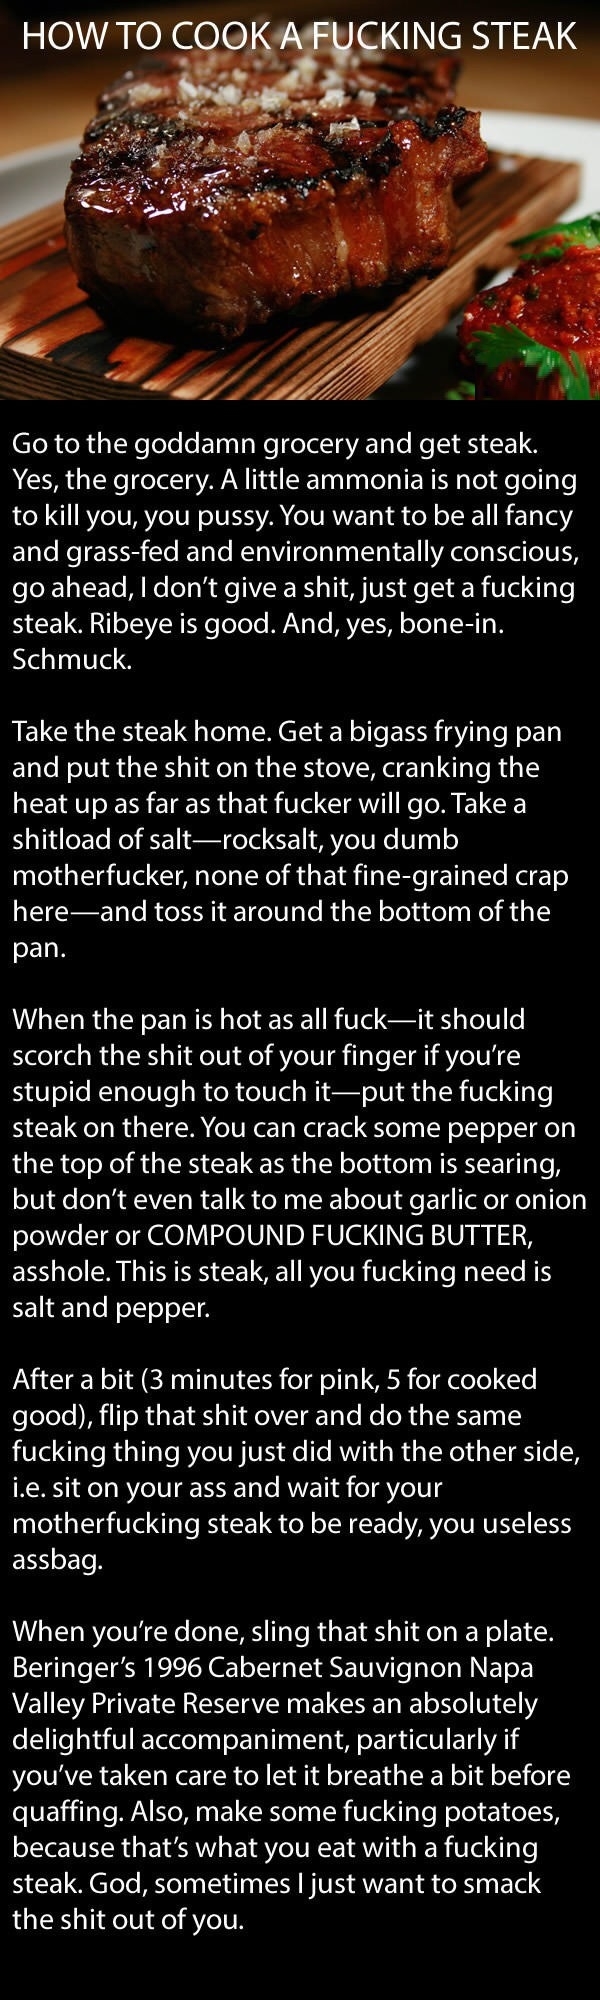 How to cook a f**king steak